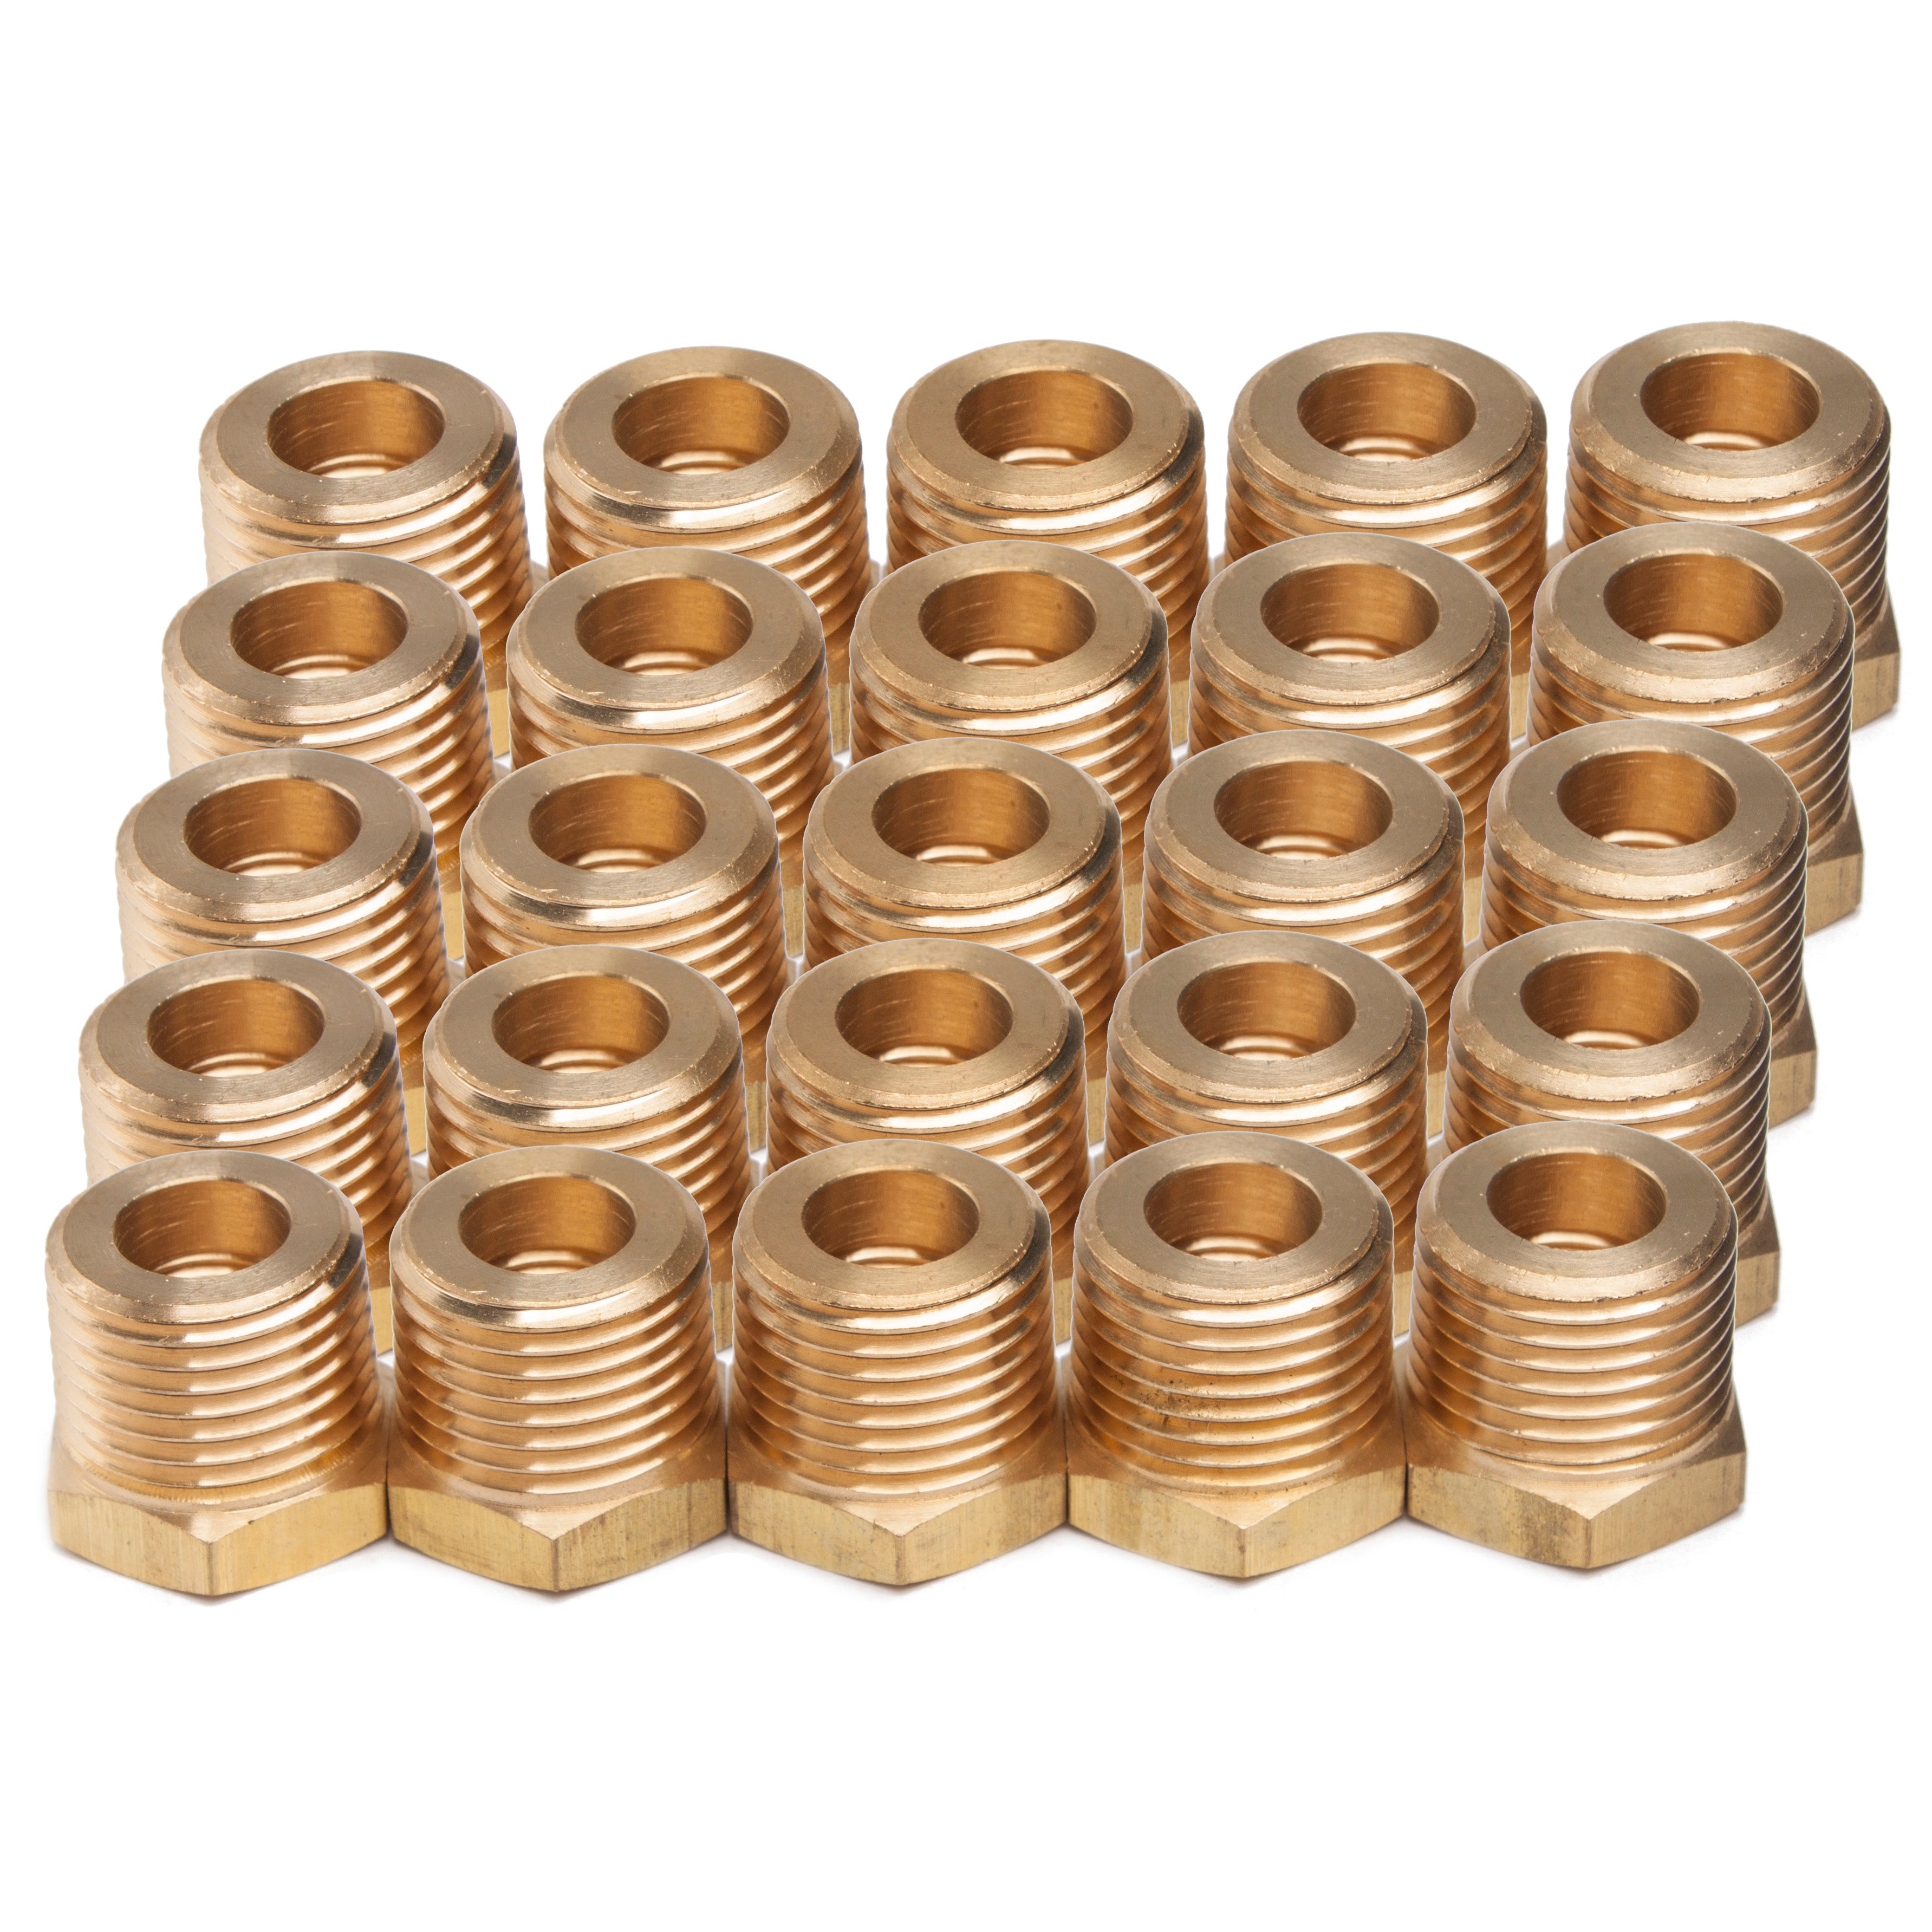 LTWFITTING Brass Pipe Hex Bushing Reducer Fittings 1/2-Inch Male BSPT x 1/4-Inch Female BSPP (Pack of 25)